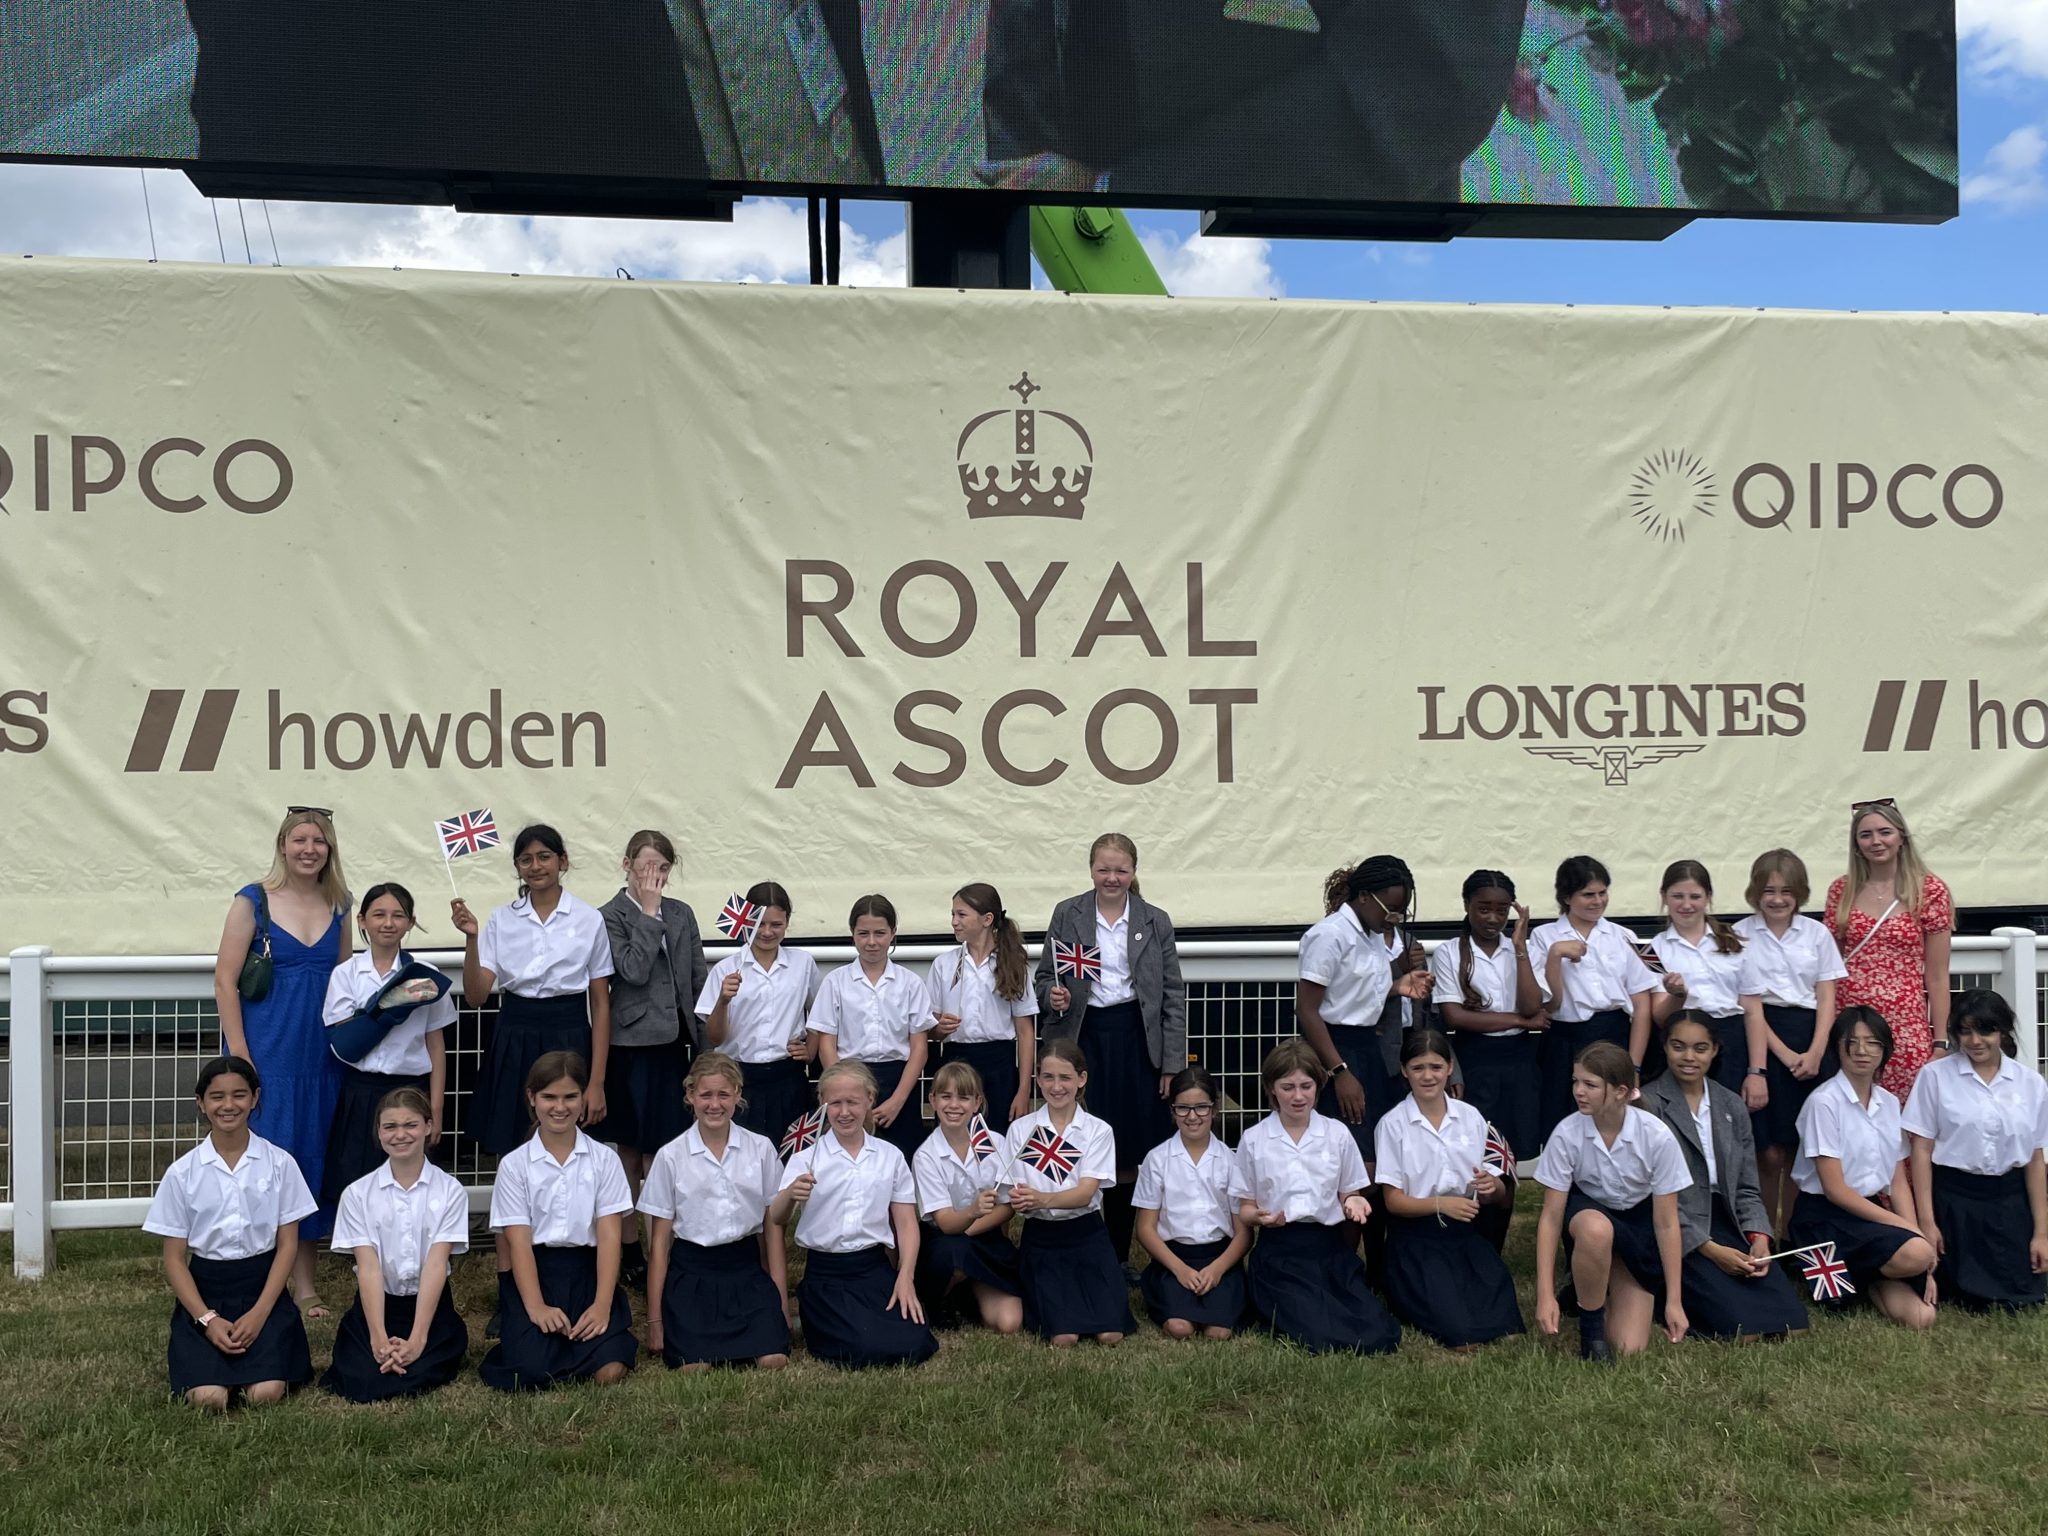 A Special Invitation to Royal Ascot